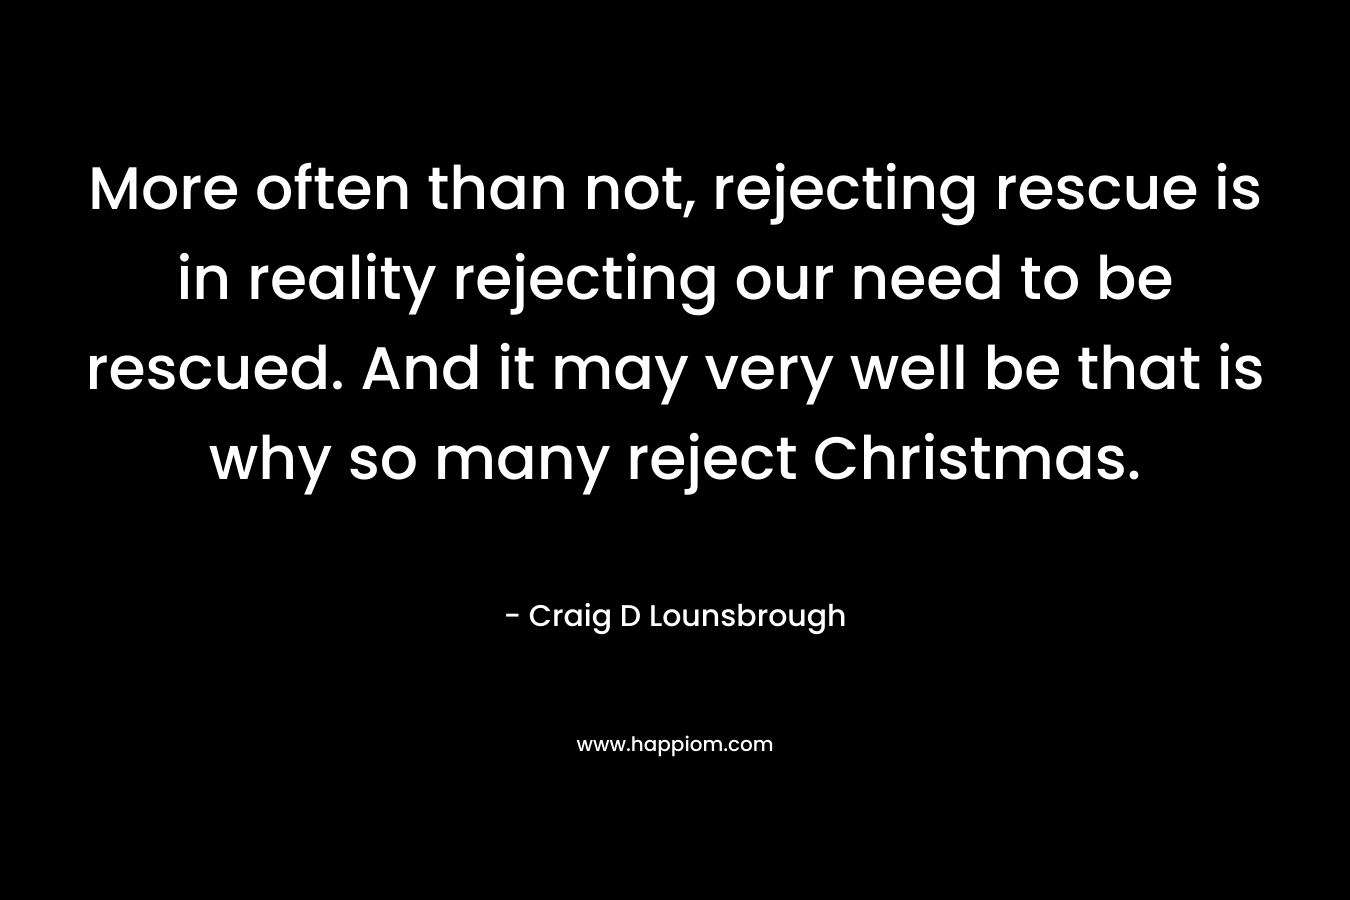 More often than not, rejecting rescue is in reality rejecting our need to be rescued. And it may very well be that is why so many reject Christmas. – Craig D Lounsbrough